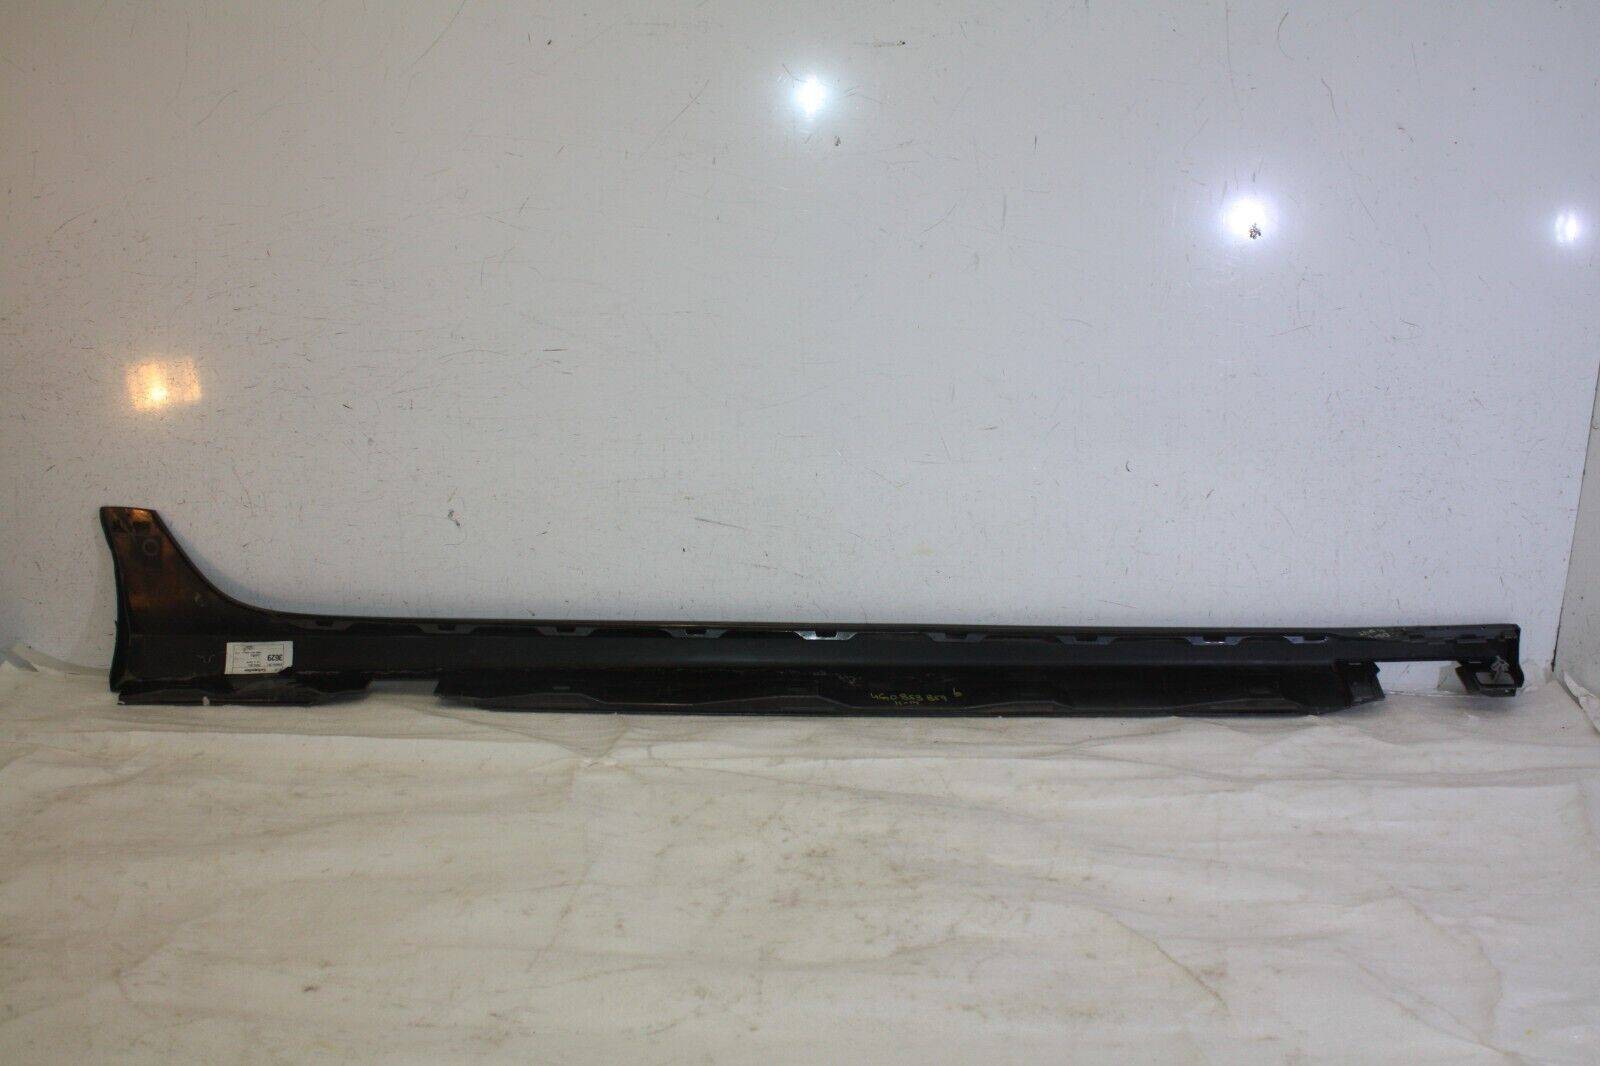 Audi-A6-C7-S-Line-Left-Side-Skirt-2011-TO-2014-4G0853859F-Genuine-SEE-PICS-176215349130-13